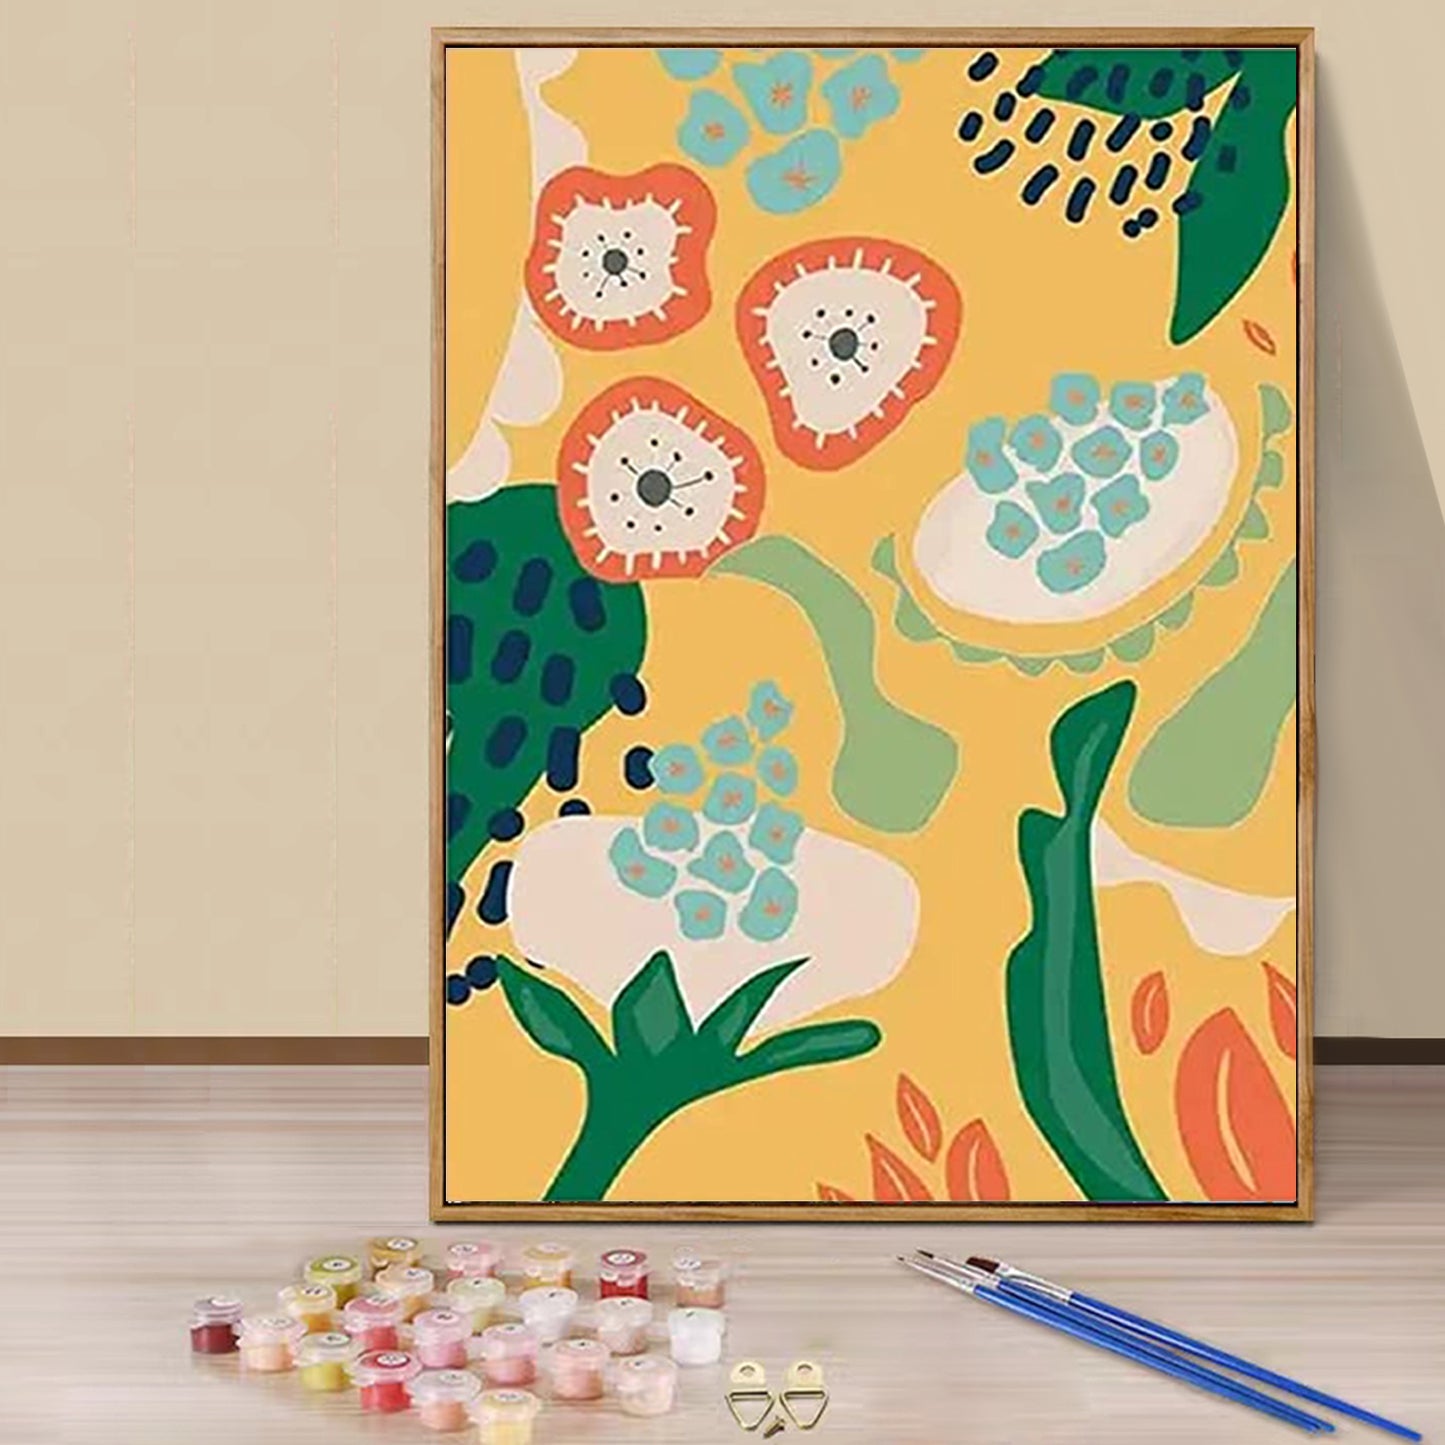 Flower - Painting with Numbers -20x30cm - 6 pack